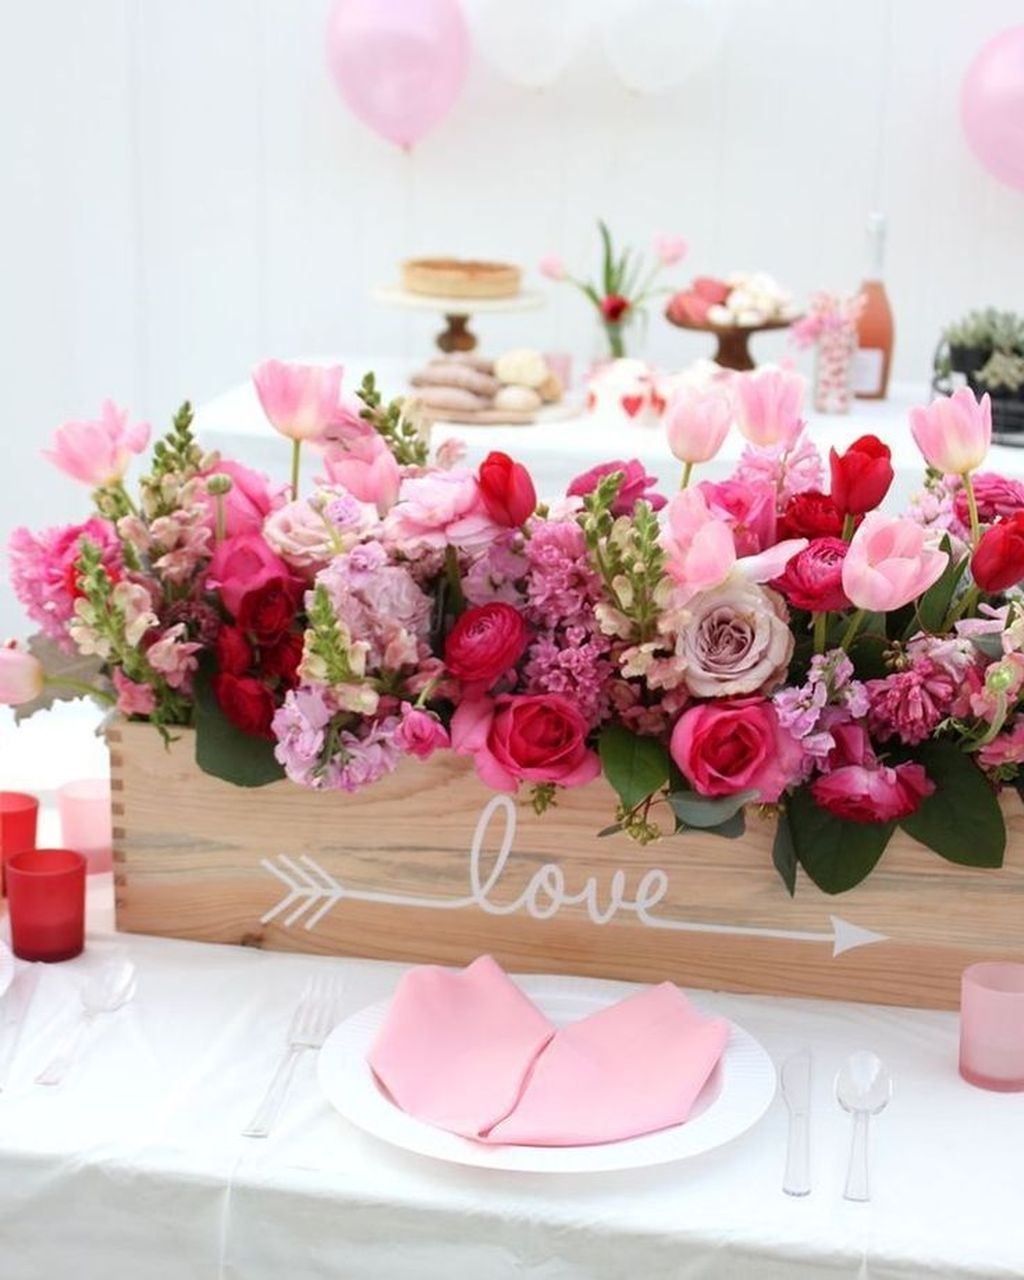 Perfect Valentine’s Day Romantic Dining Table Decor Ideas For Two People 13